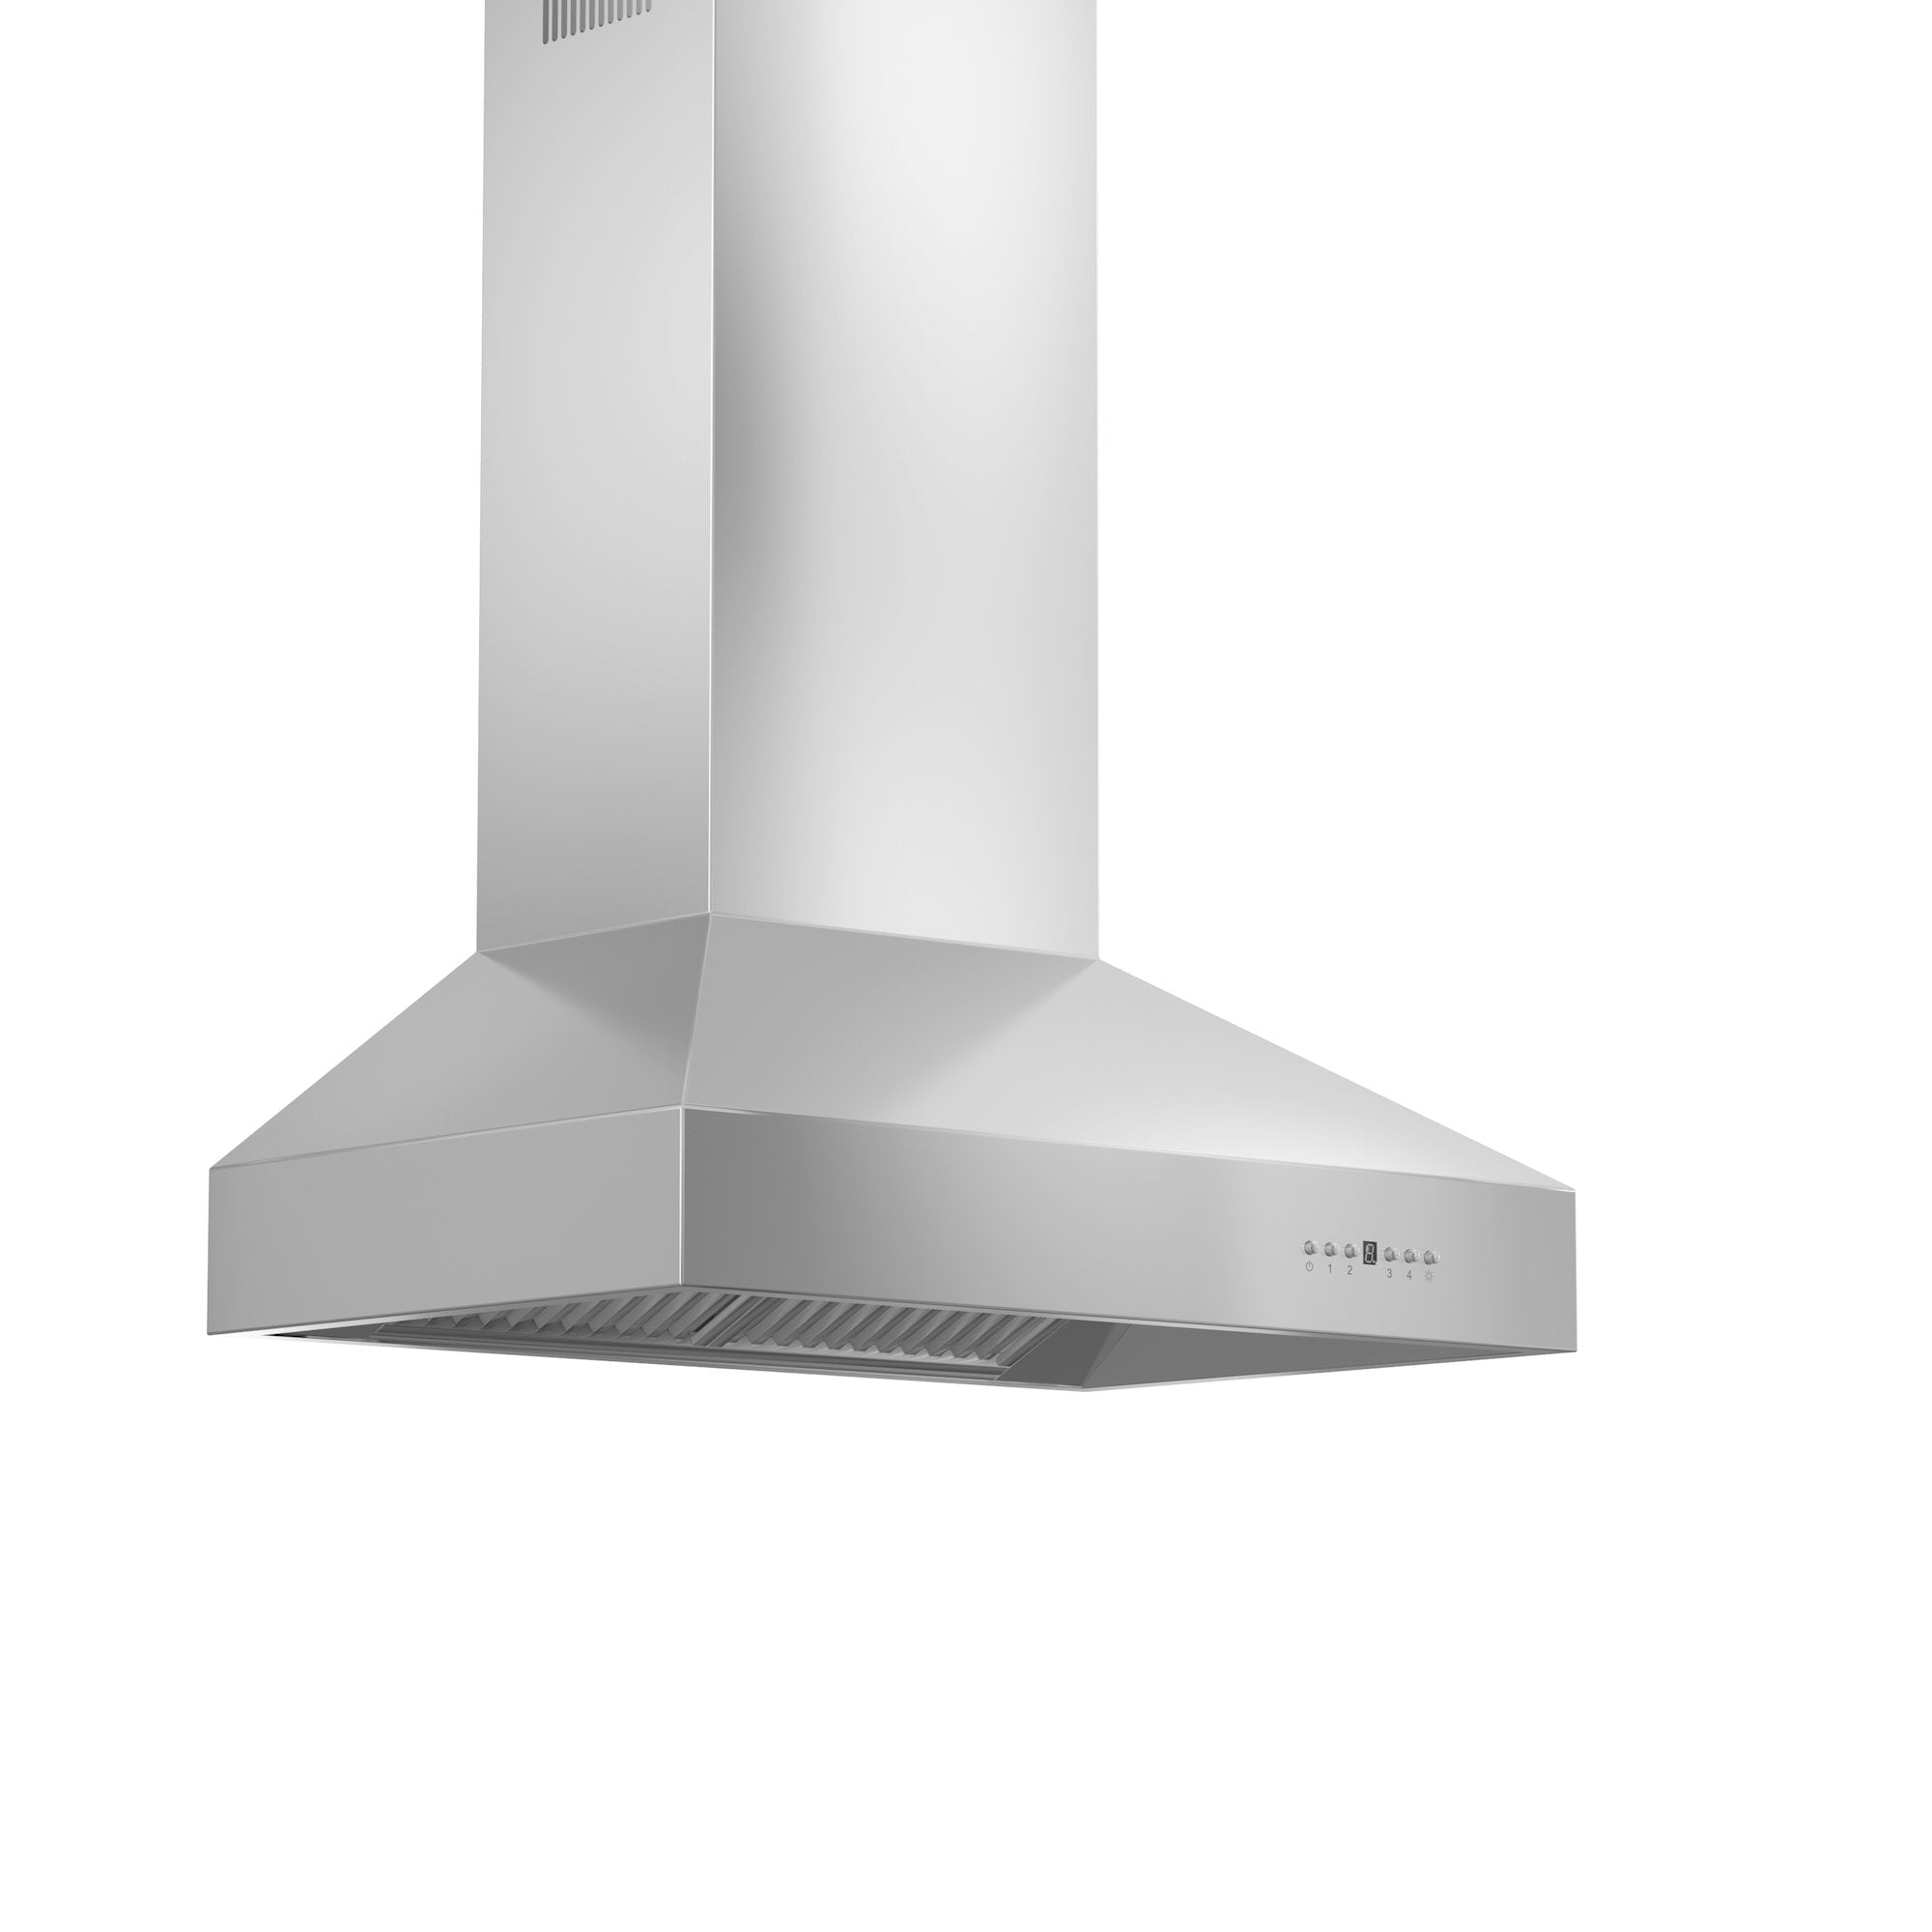 ZLINE 30" Convertible Vent Wall Mount Range Hood in Outdoor Approved Stainless Steel (697-304-30)